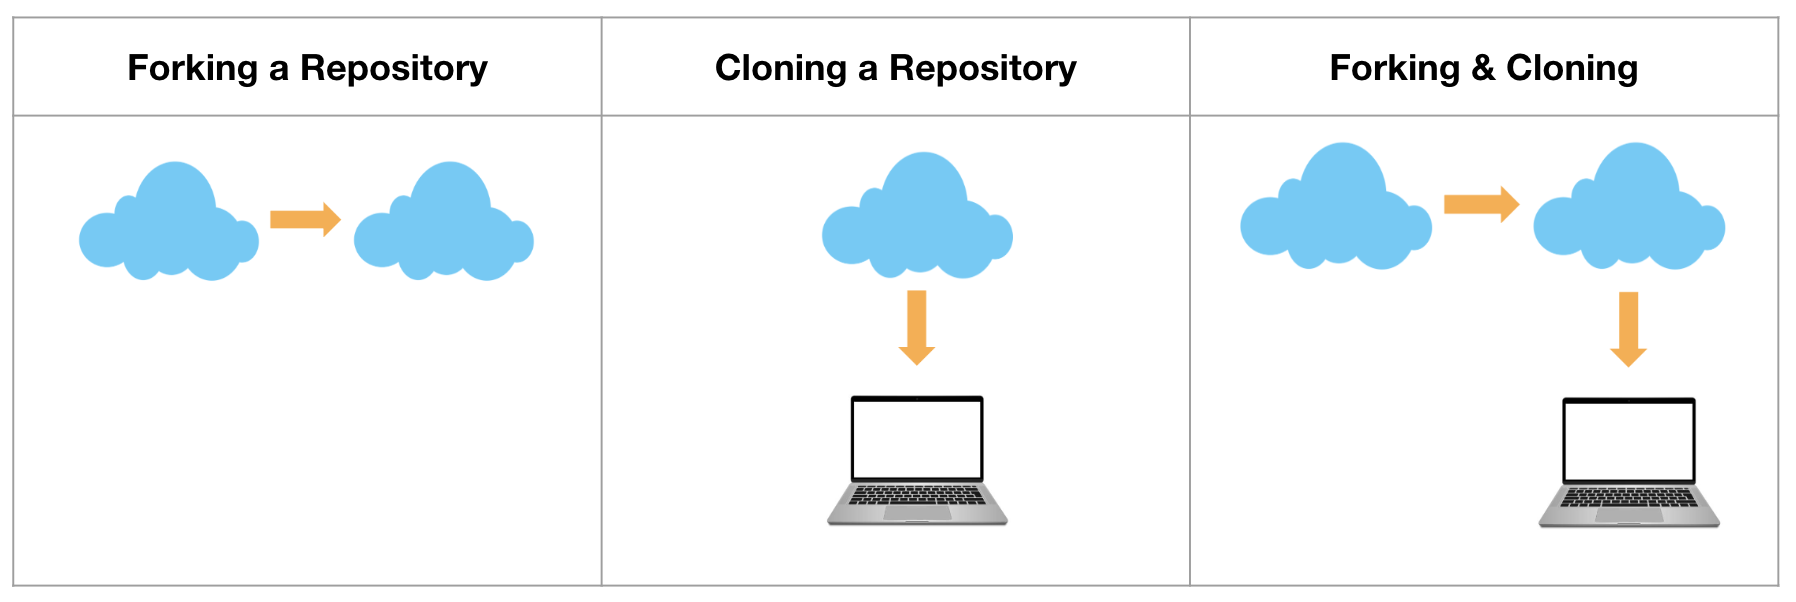 Diagram showing the difference between forking and cloning a repository